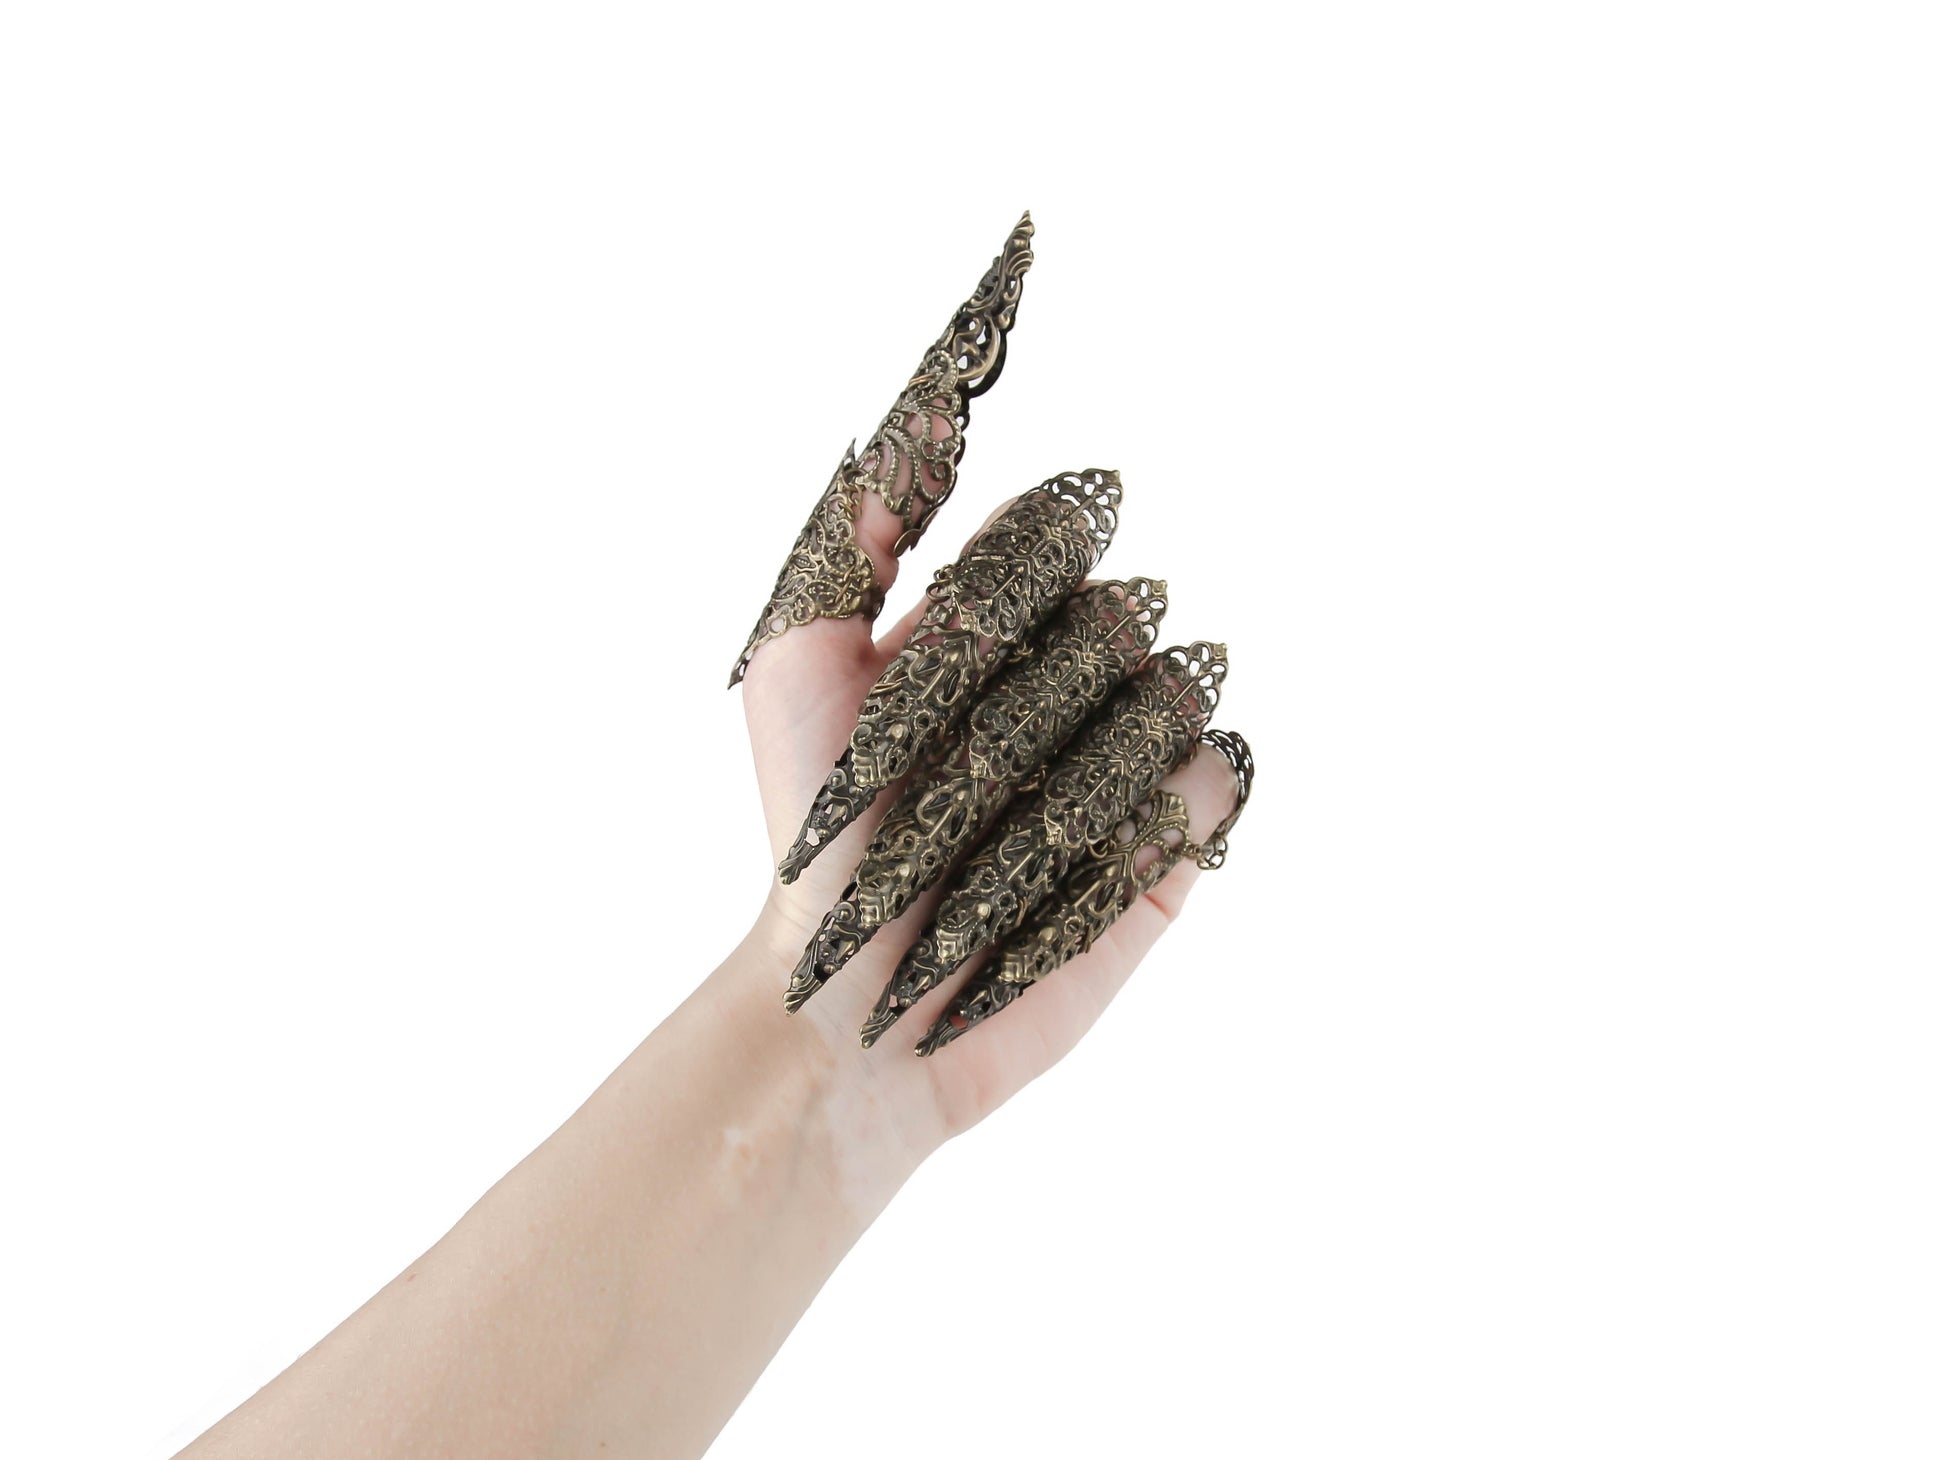 Hand adorned with Myril Jewels' bronze midi rings, each extending into intricate long claws, embodying a neo-gothic flair. Perfect for those who favor Halloween Jewelry or bold, gothic-chic everyday wear, these rings are true festival jewels, reflecting a dark, avant-garde style